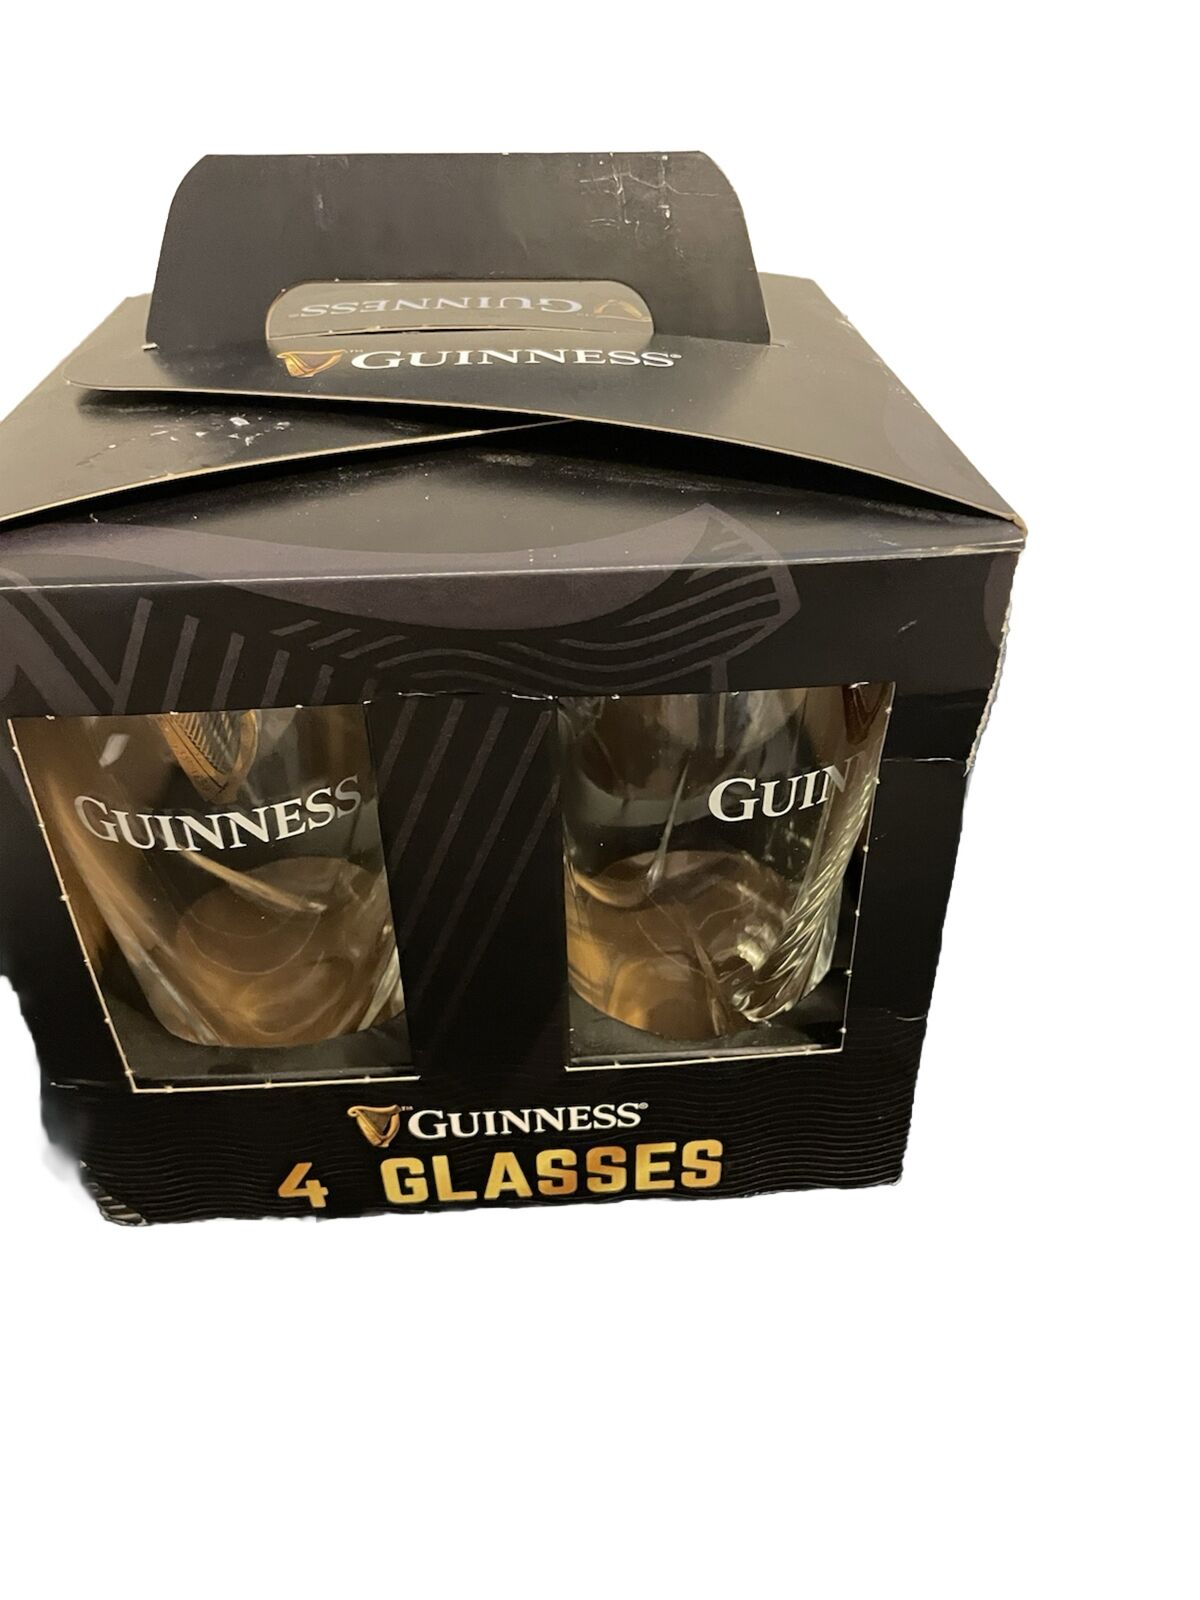 Guinness embossed 4-pack - Irish Design. Beer. New. Box Has Some Damage See Pics